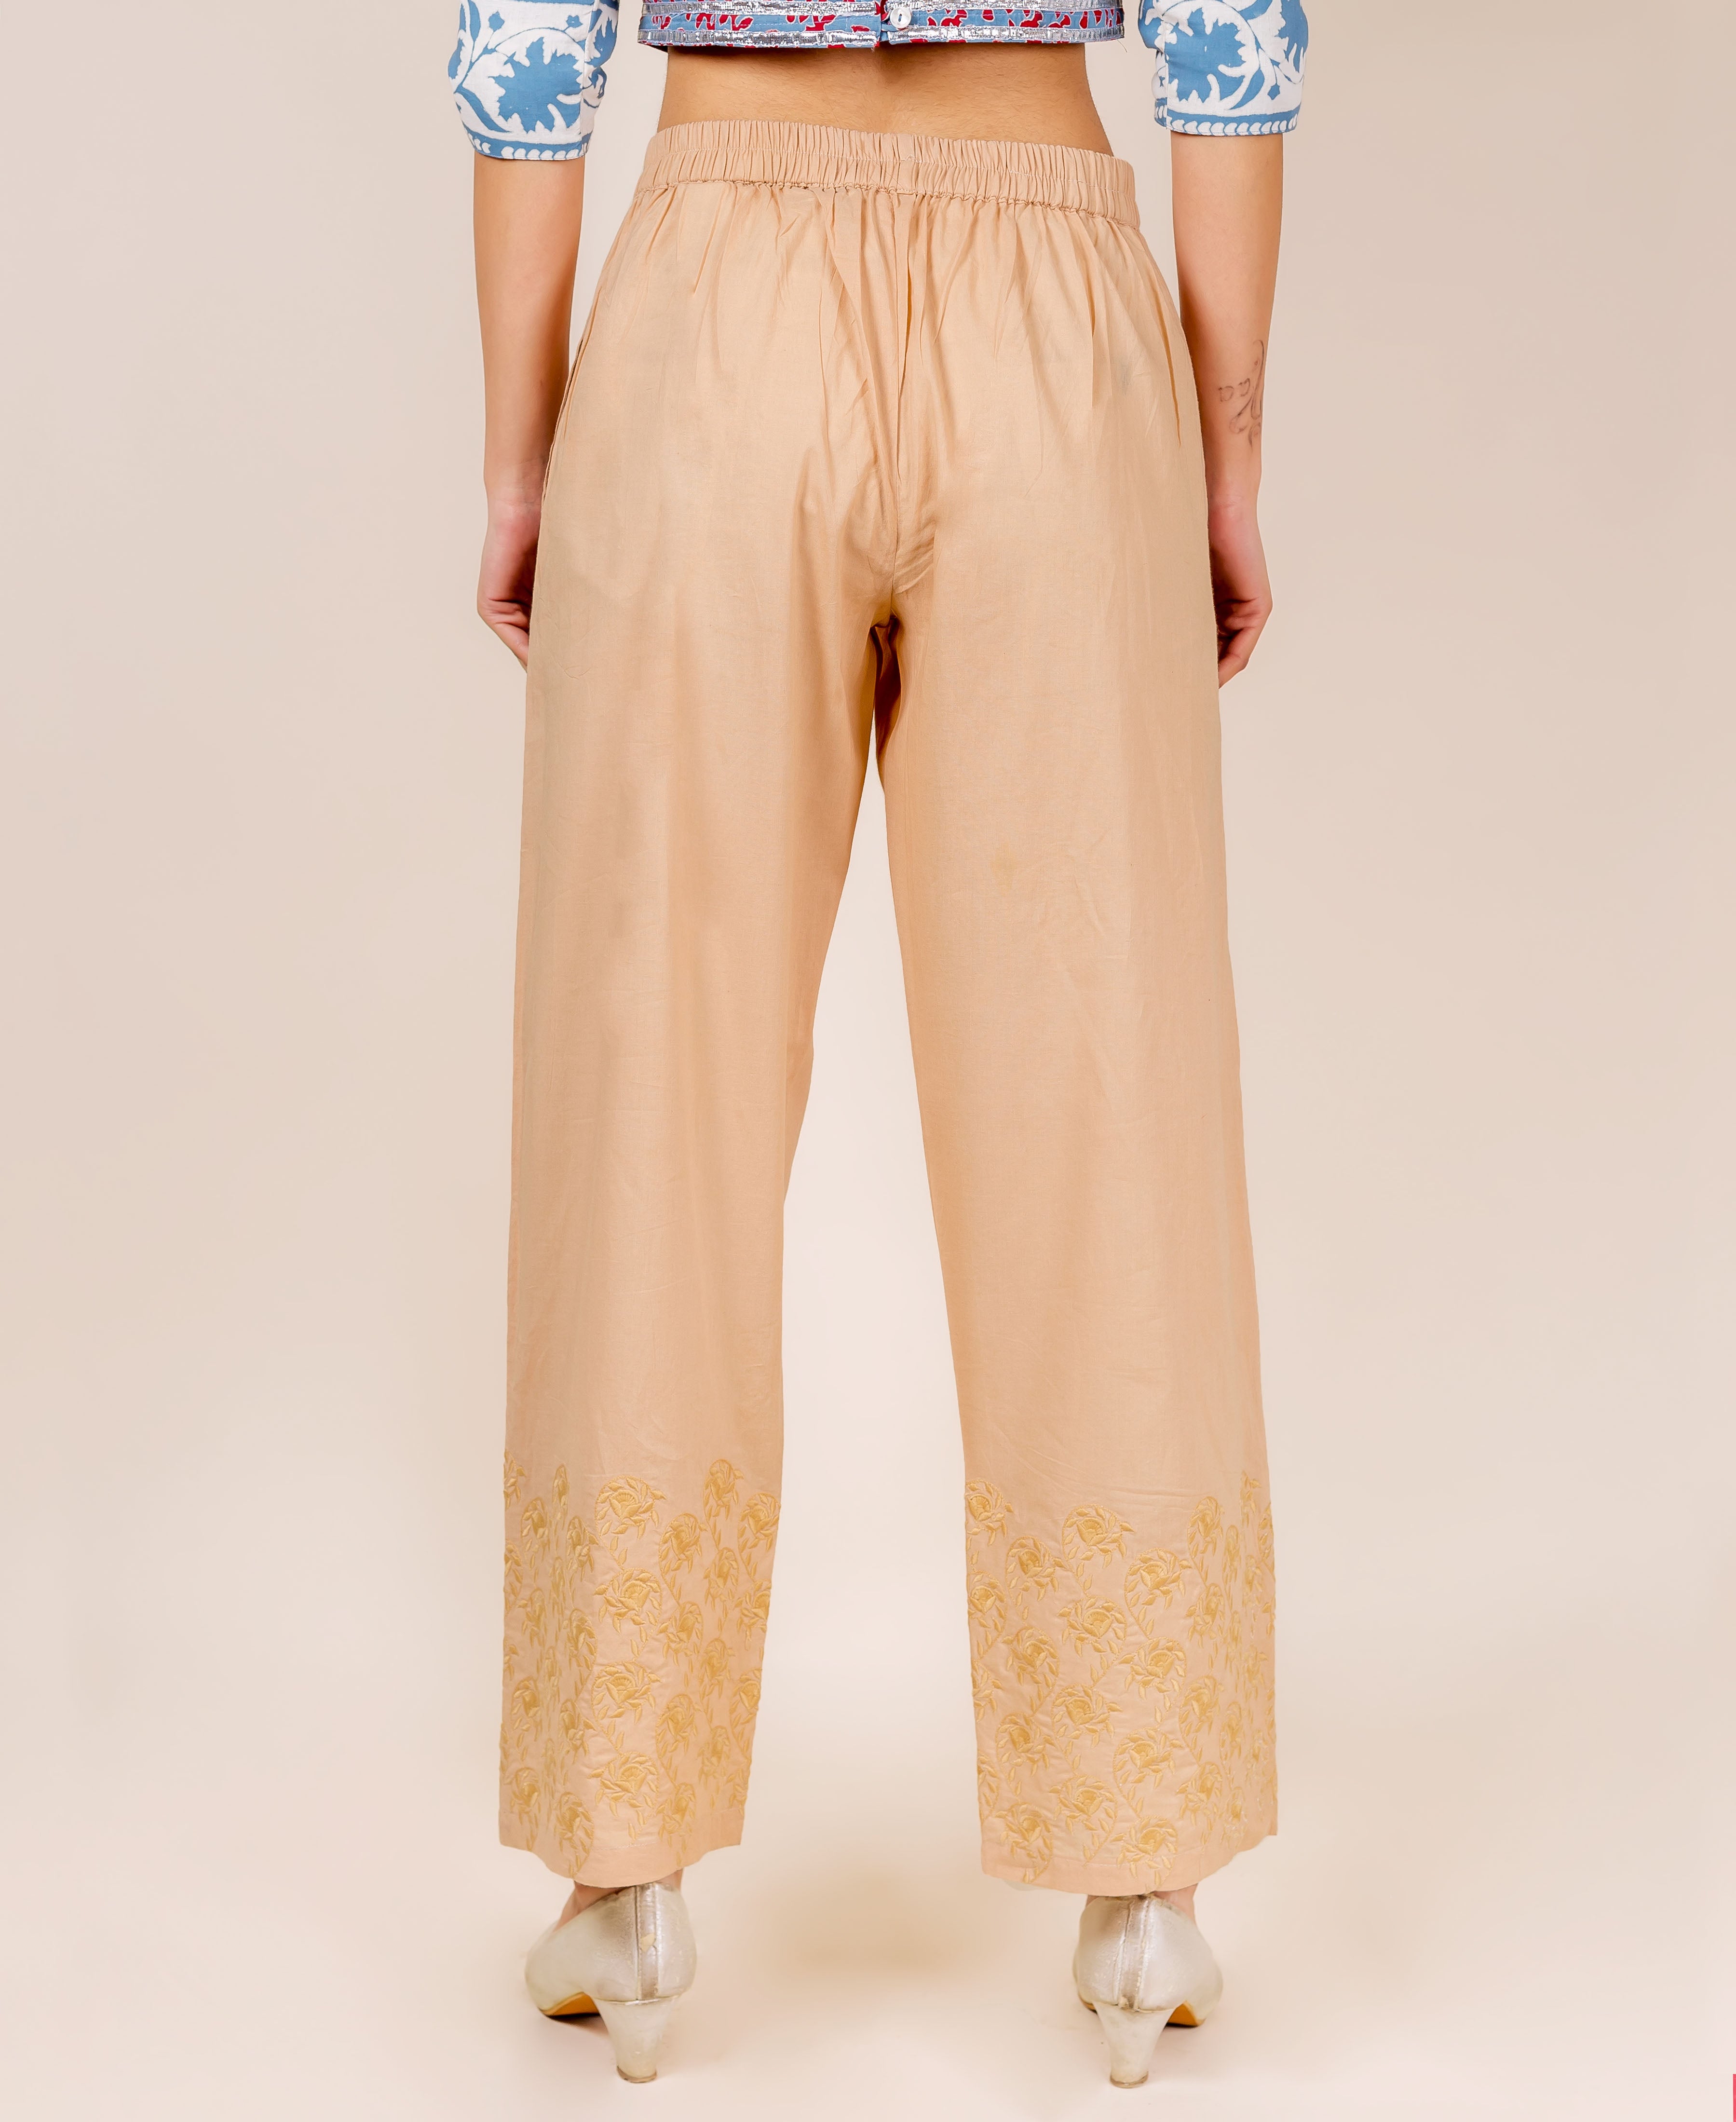 Lacey Daisy Pants - Peach – The Neh Store